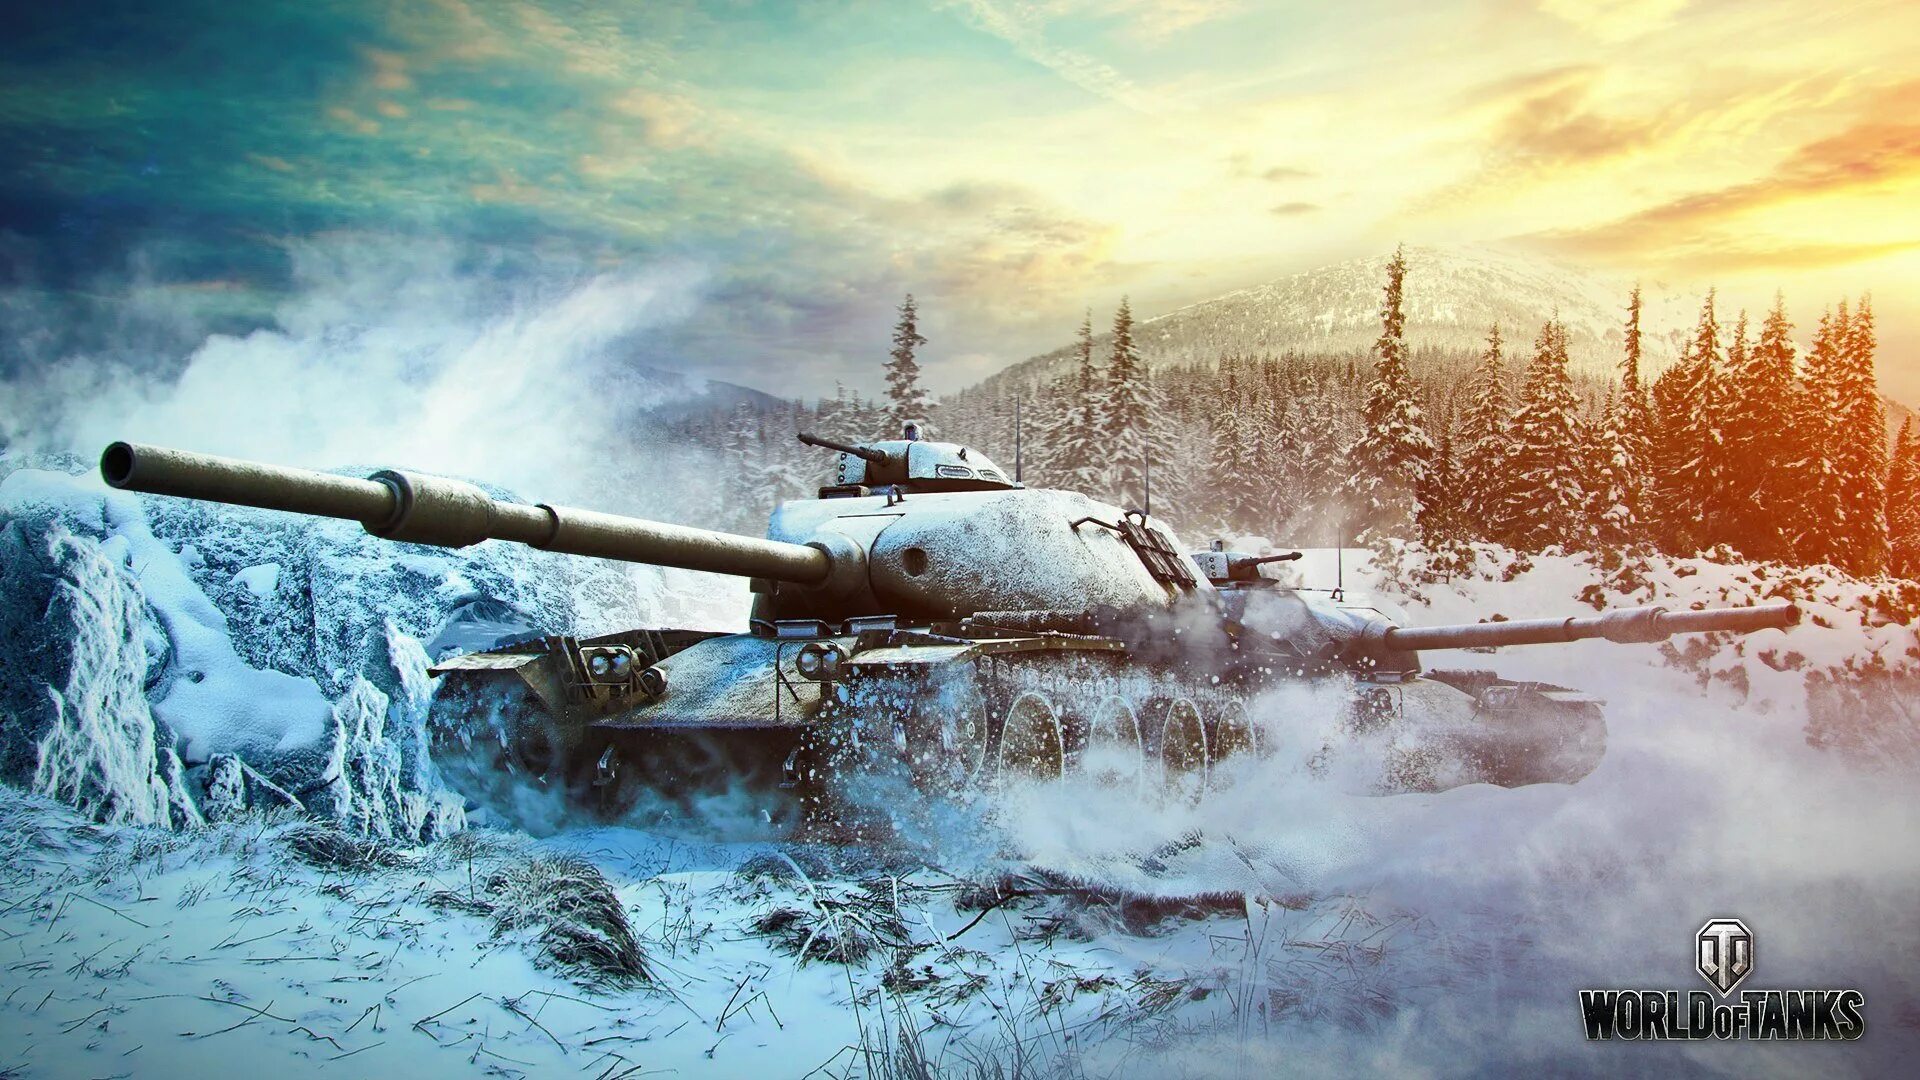 T95e6 WOT Blitz. Т-95 В World of Tanks. Танк т95е6 в World of Tanks. Wot from wit